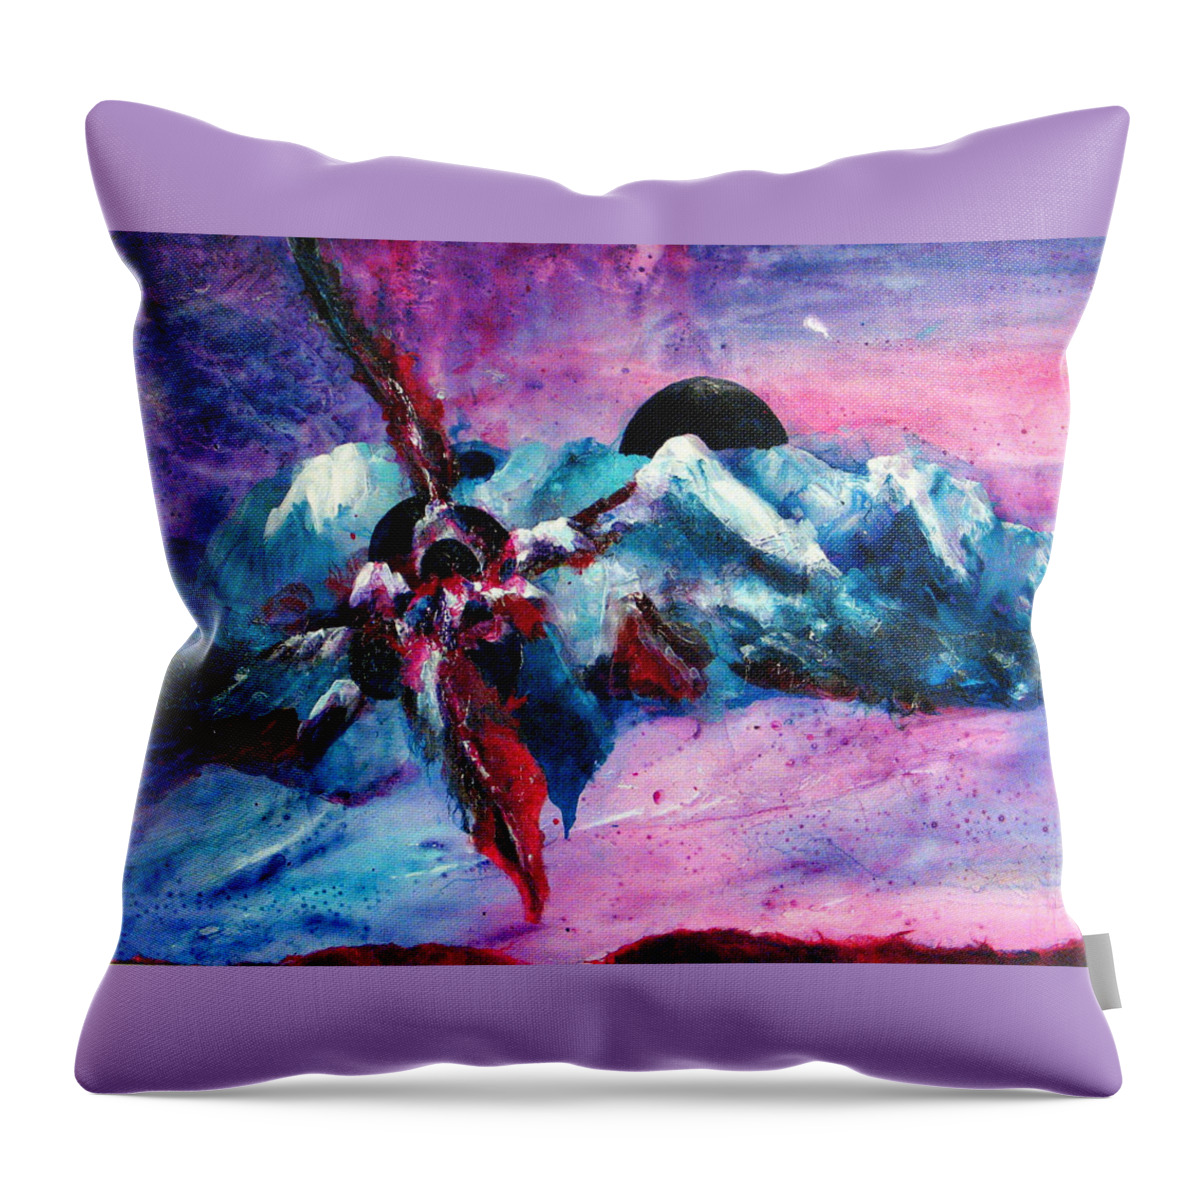 Red Throw Pillow featuring the mixed media Spirit by Janice Nabors Raiteri